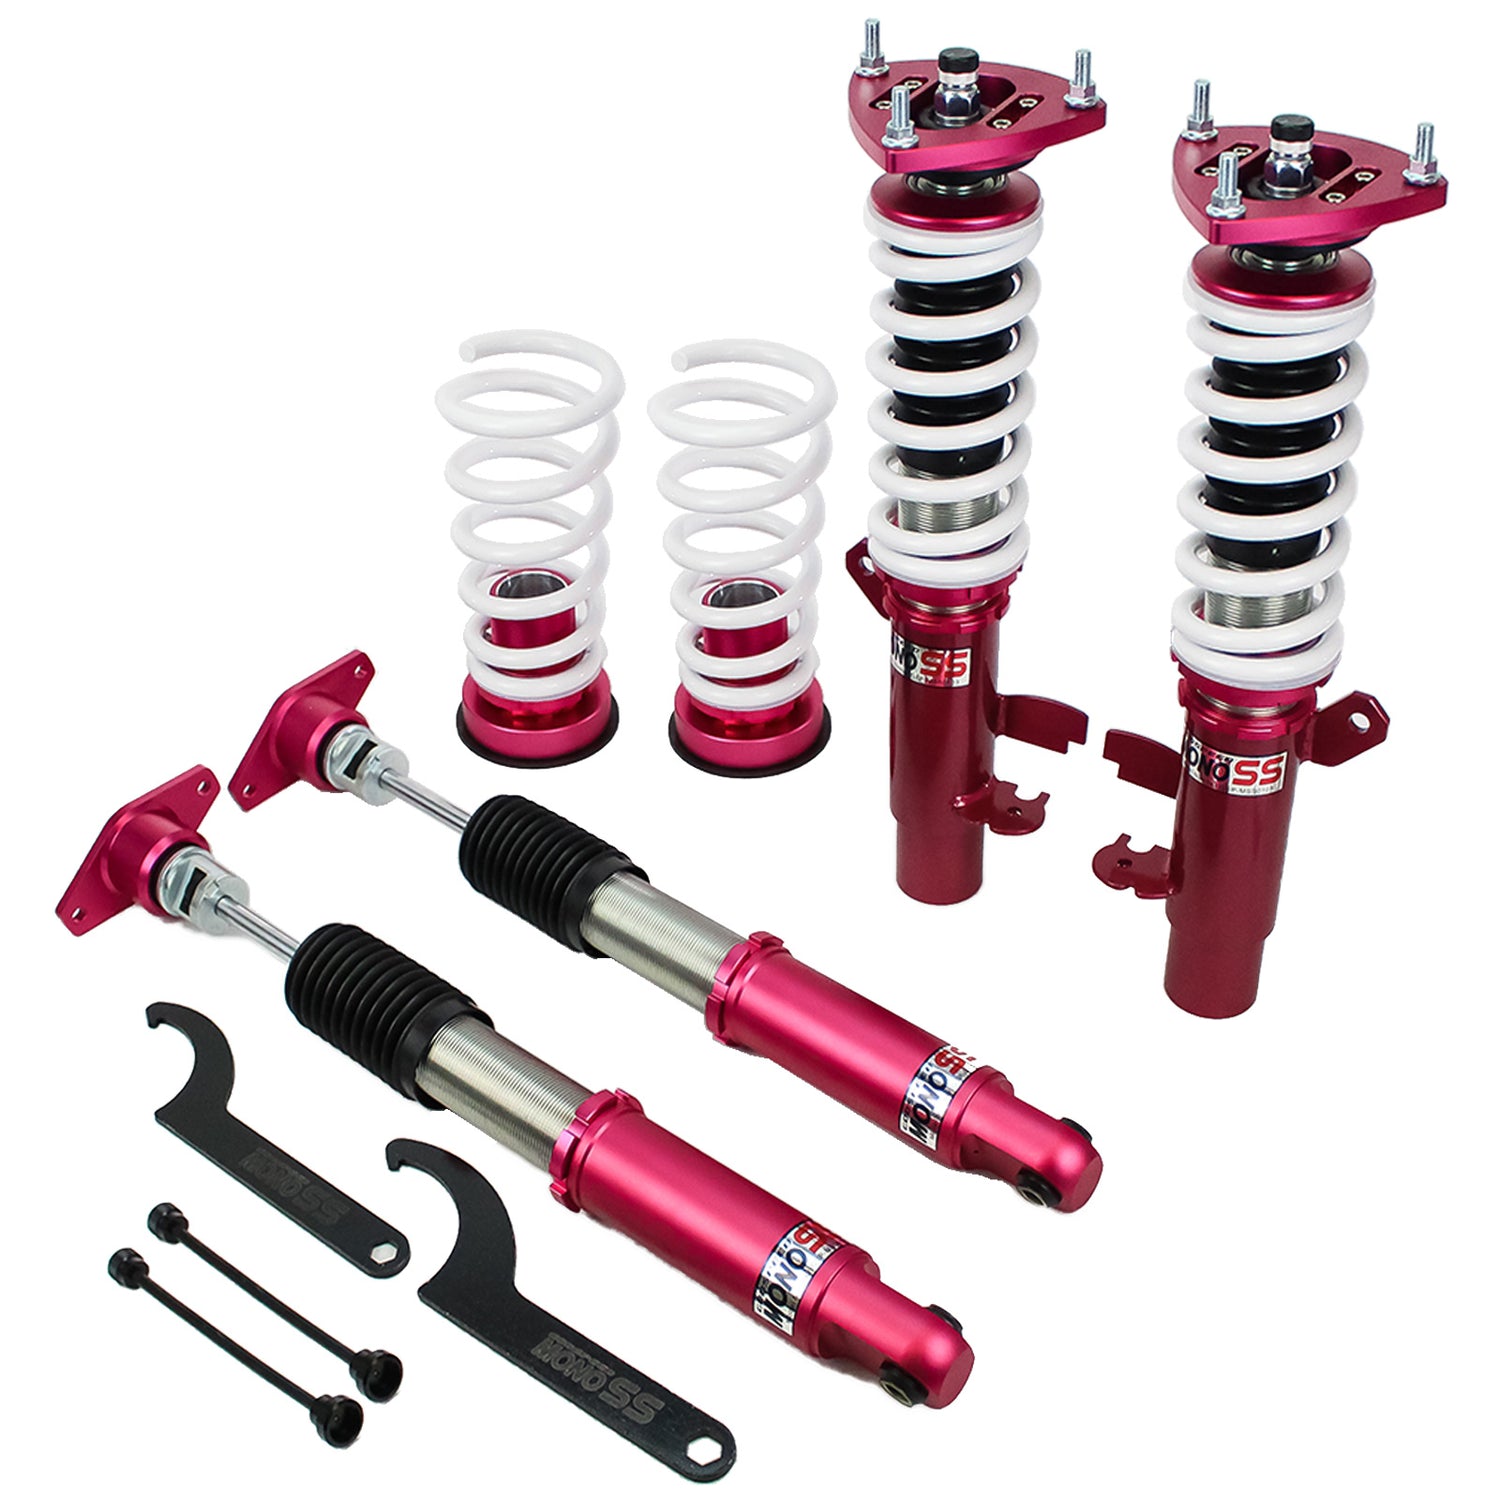 Godspeed MSS0103-A MonoSS Coilover Lowering Kit, Fully Adjustable, Ride Height, Spring Tension And 16 Click Damping, compatible Ford Focus(MK3) 2012-18